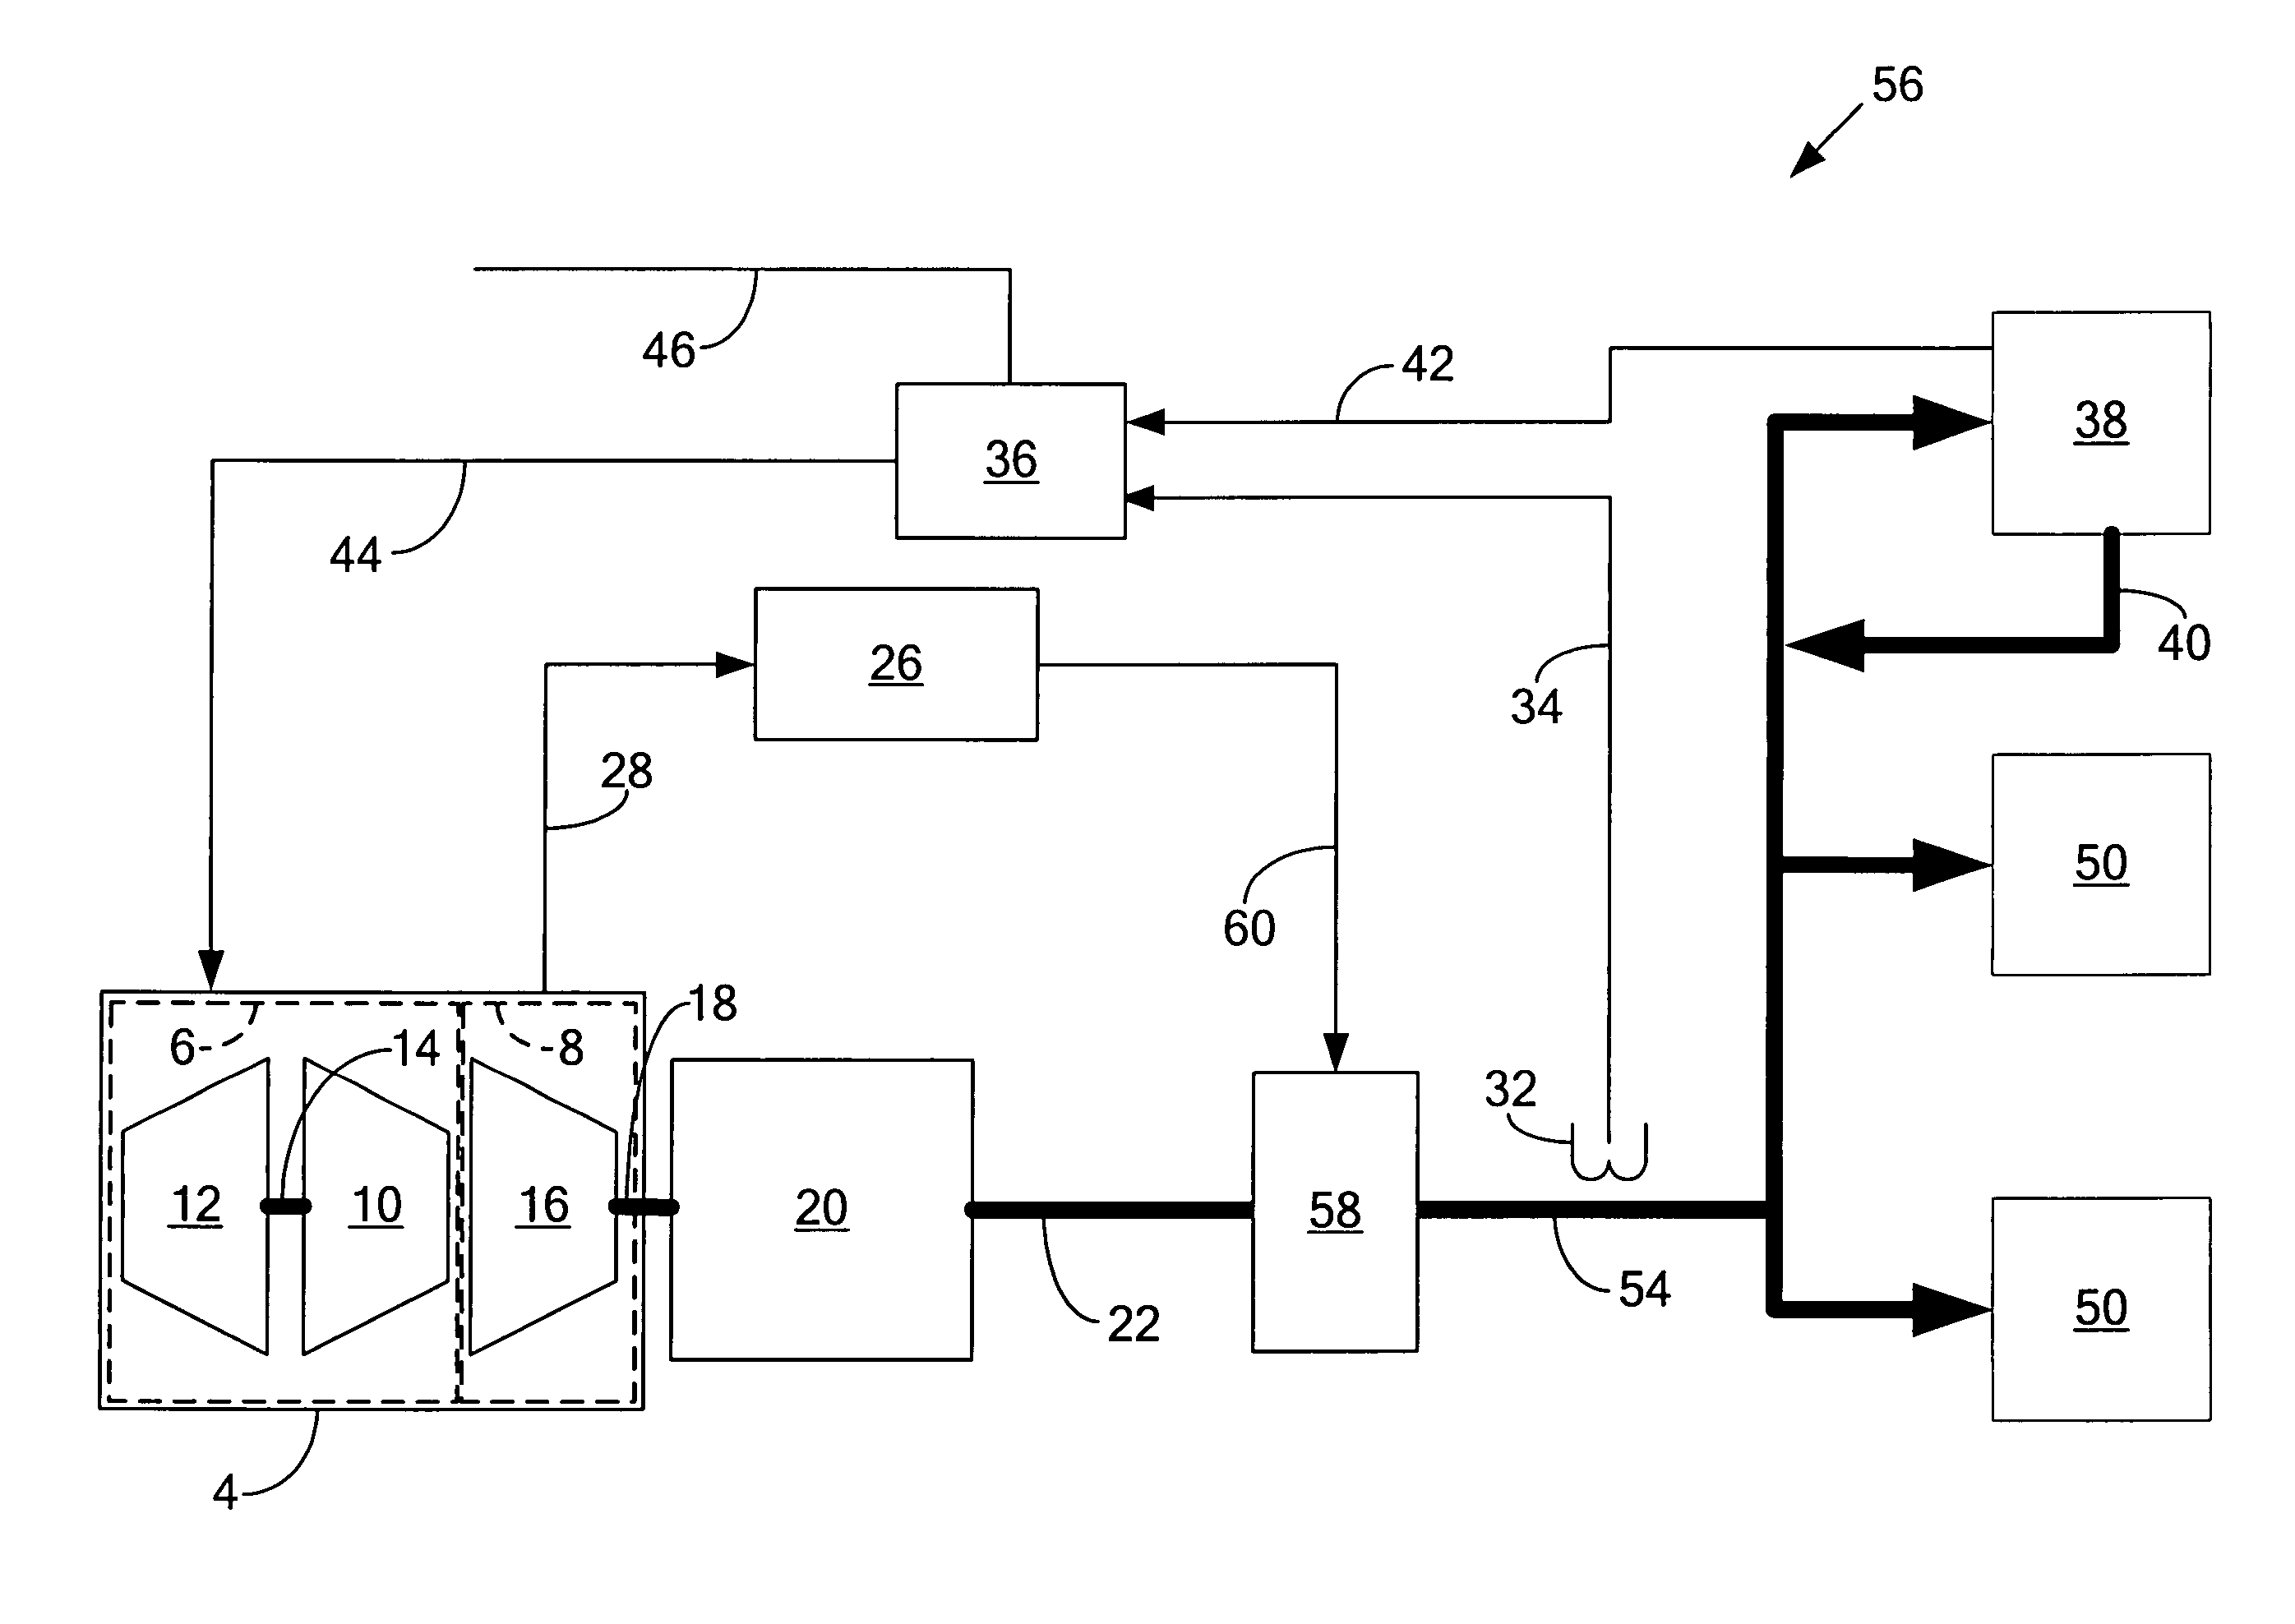 Power turbine speed control using electrical load following